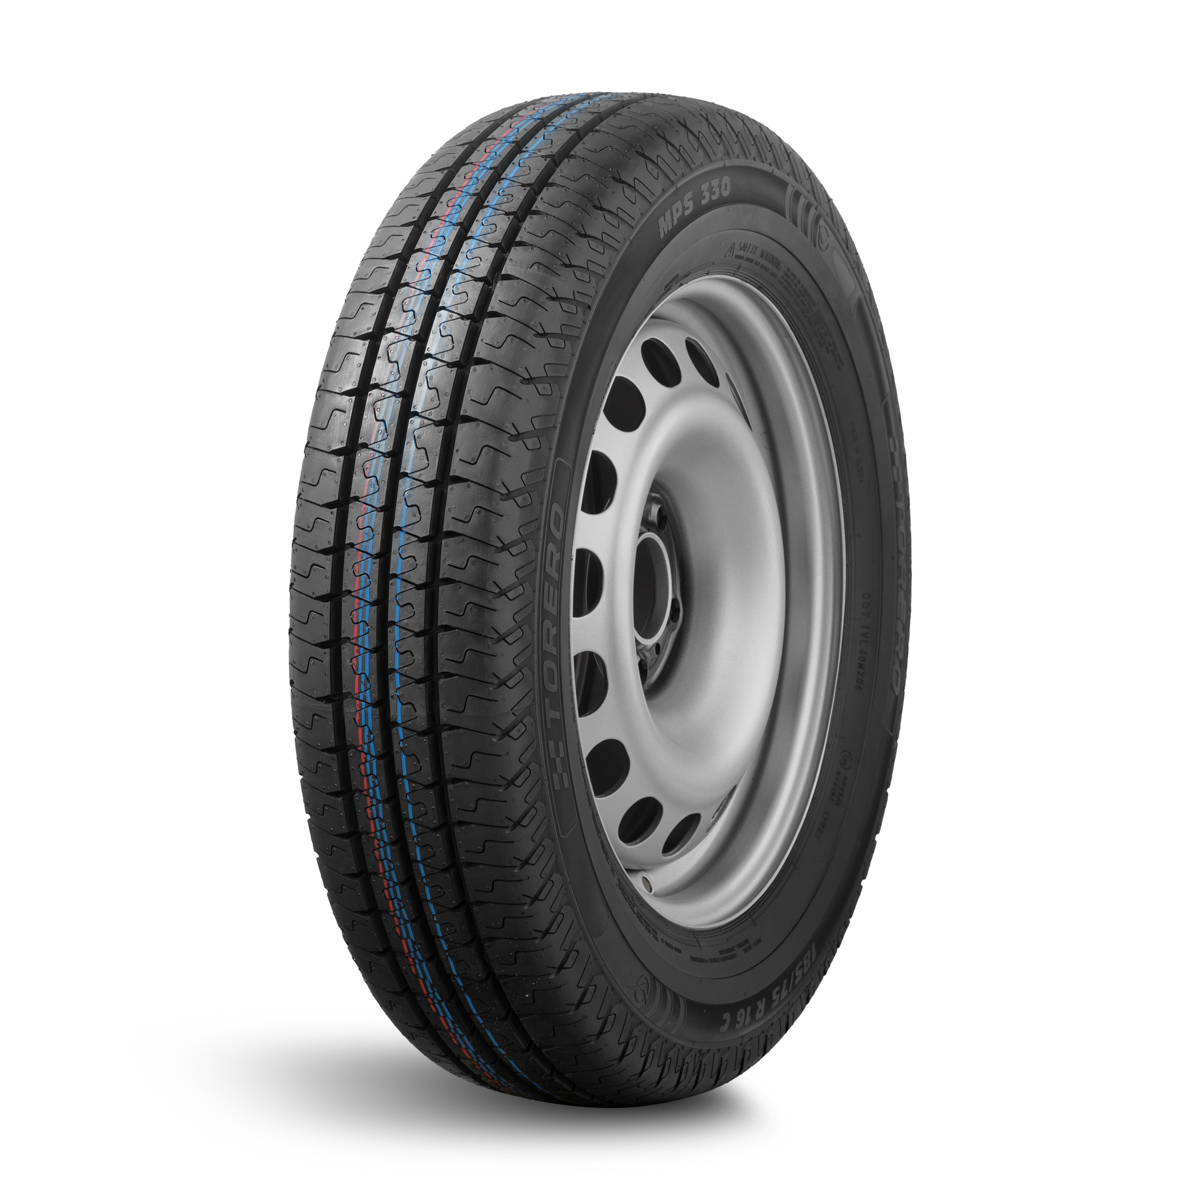 MPS330 195/70 R15 104/102R